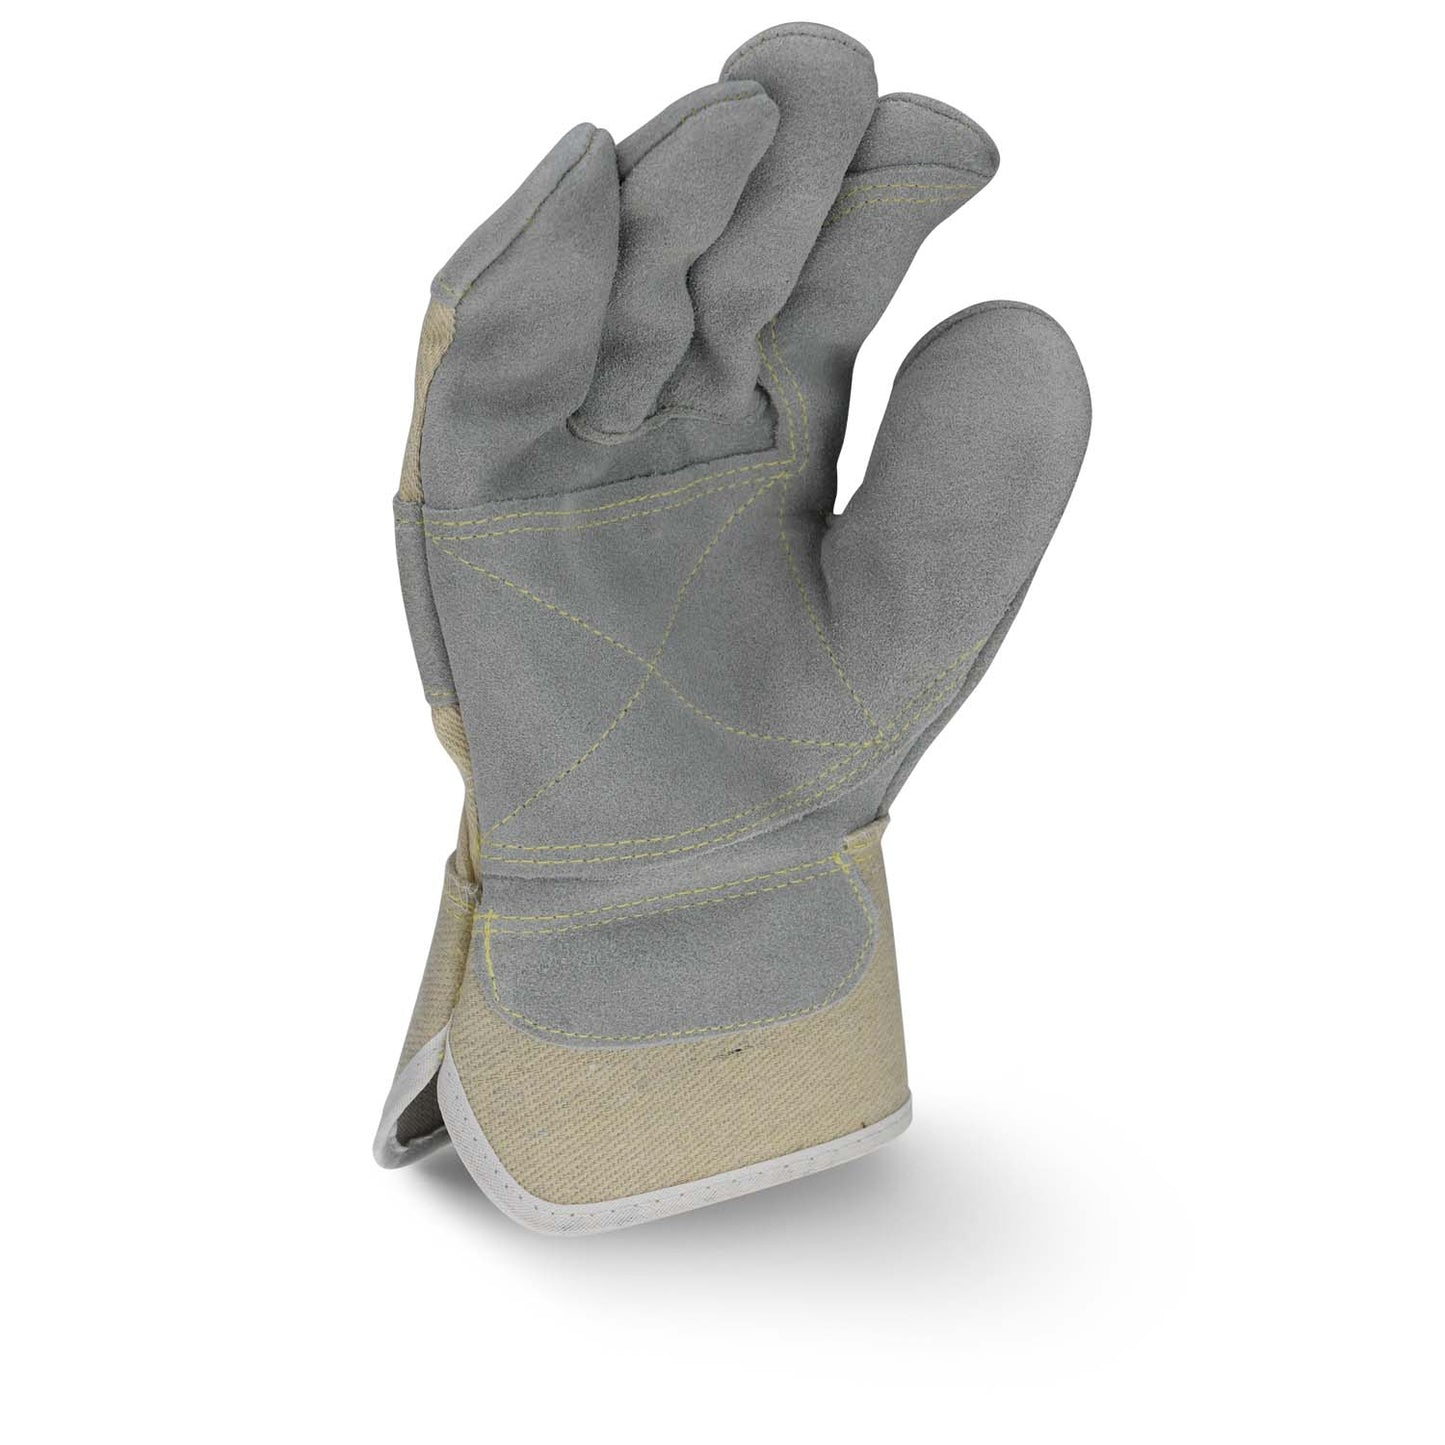 RADIANS RWG3400WDP SIDE SPLIT GRAY COWHIDE LEATHER DOUBLE PALM GLOVE